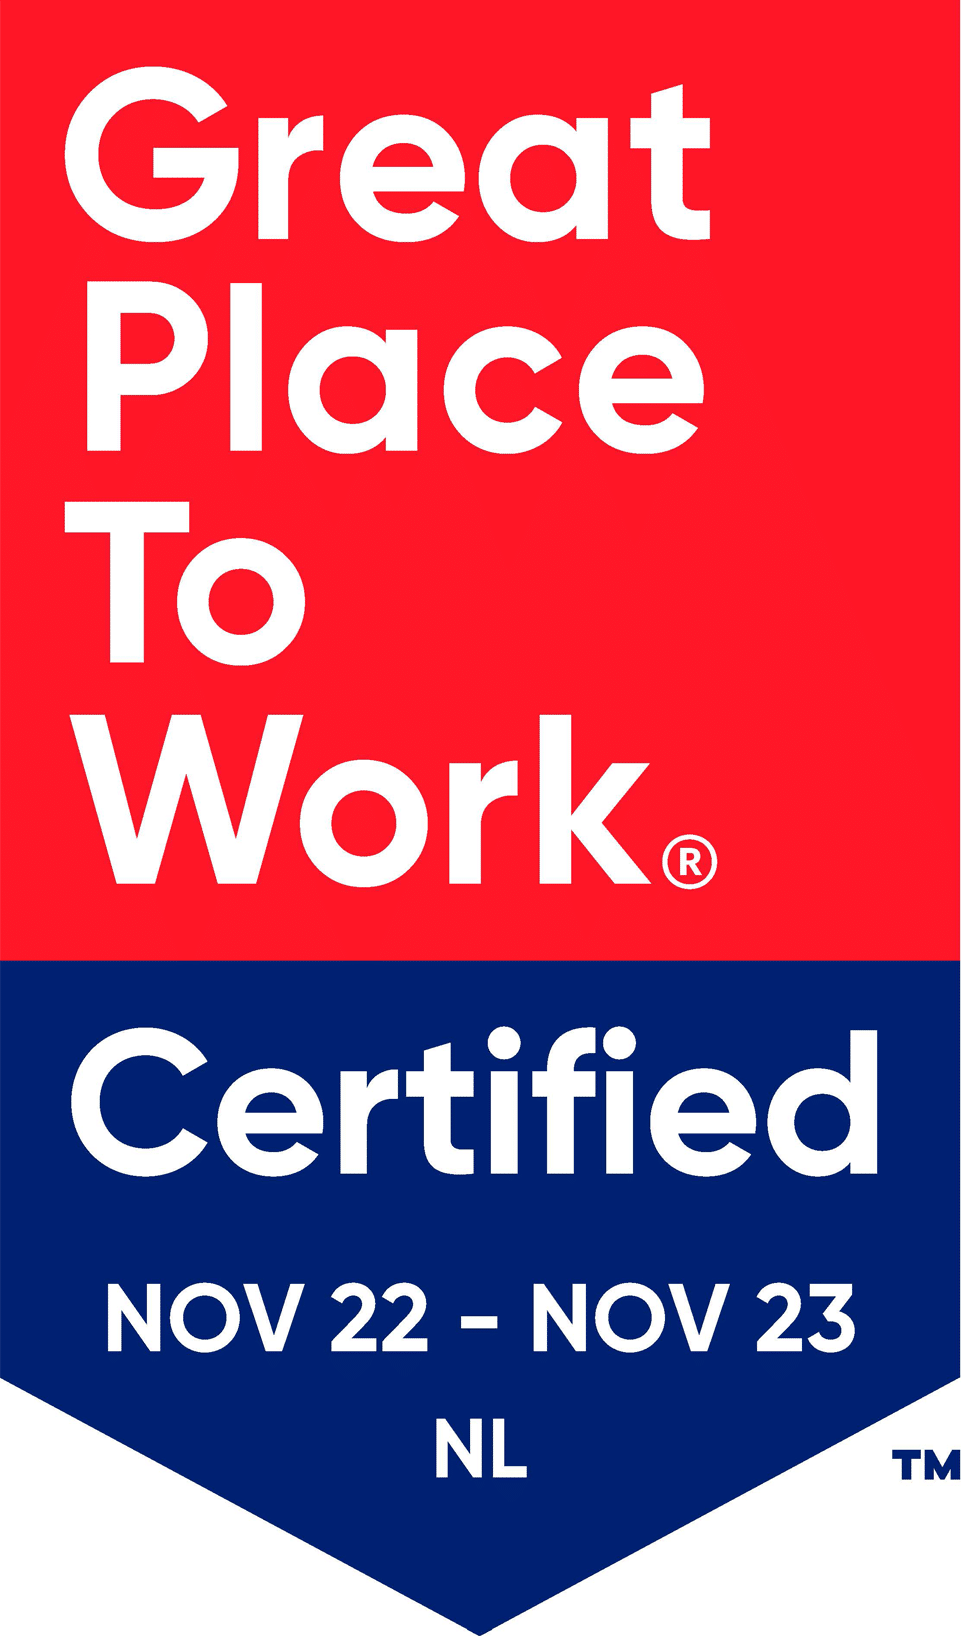 Great Place to Work Certified Career and Open Positions